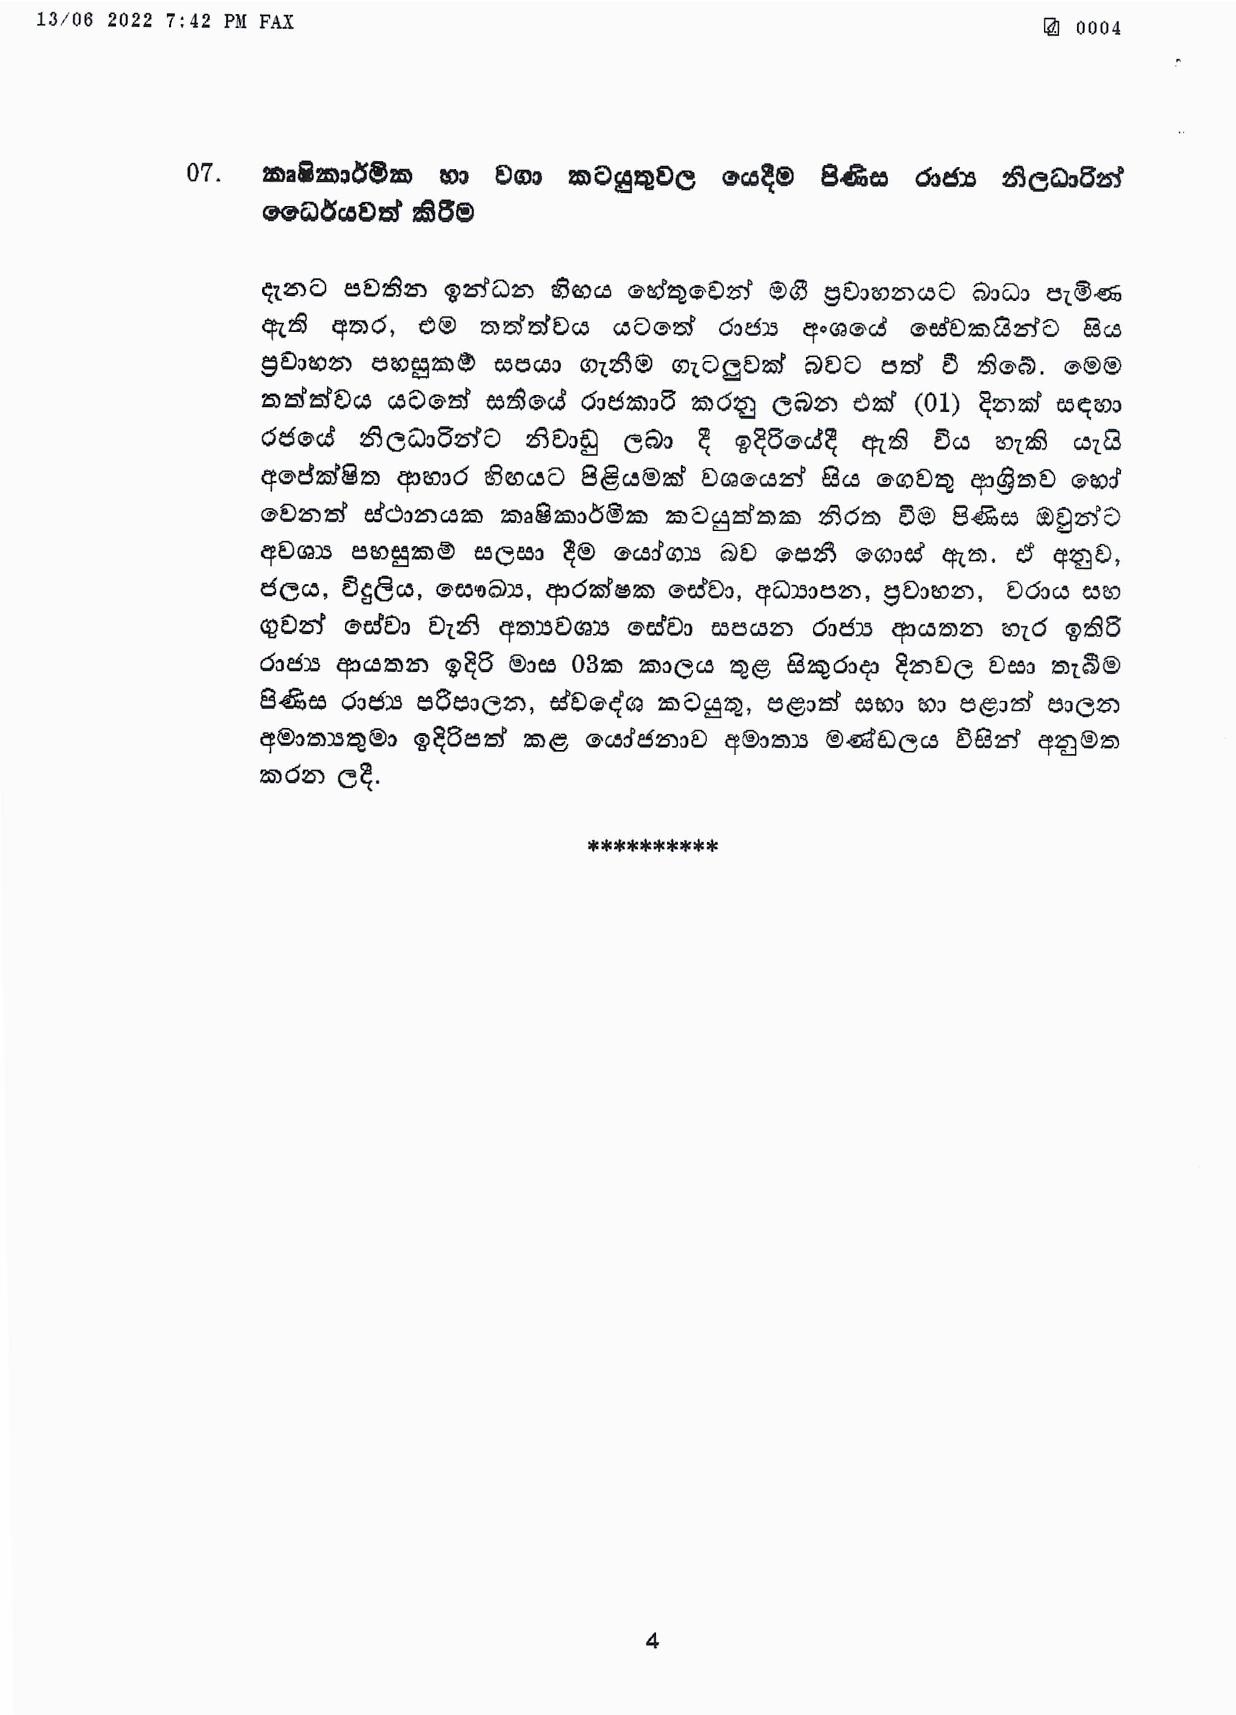 Cabinet Decision on 13.06.2022 page 004